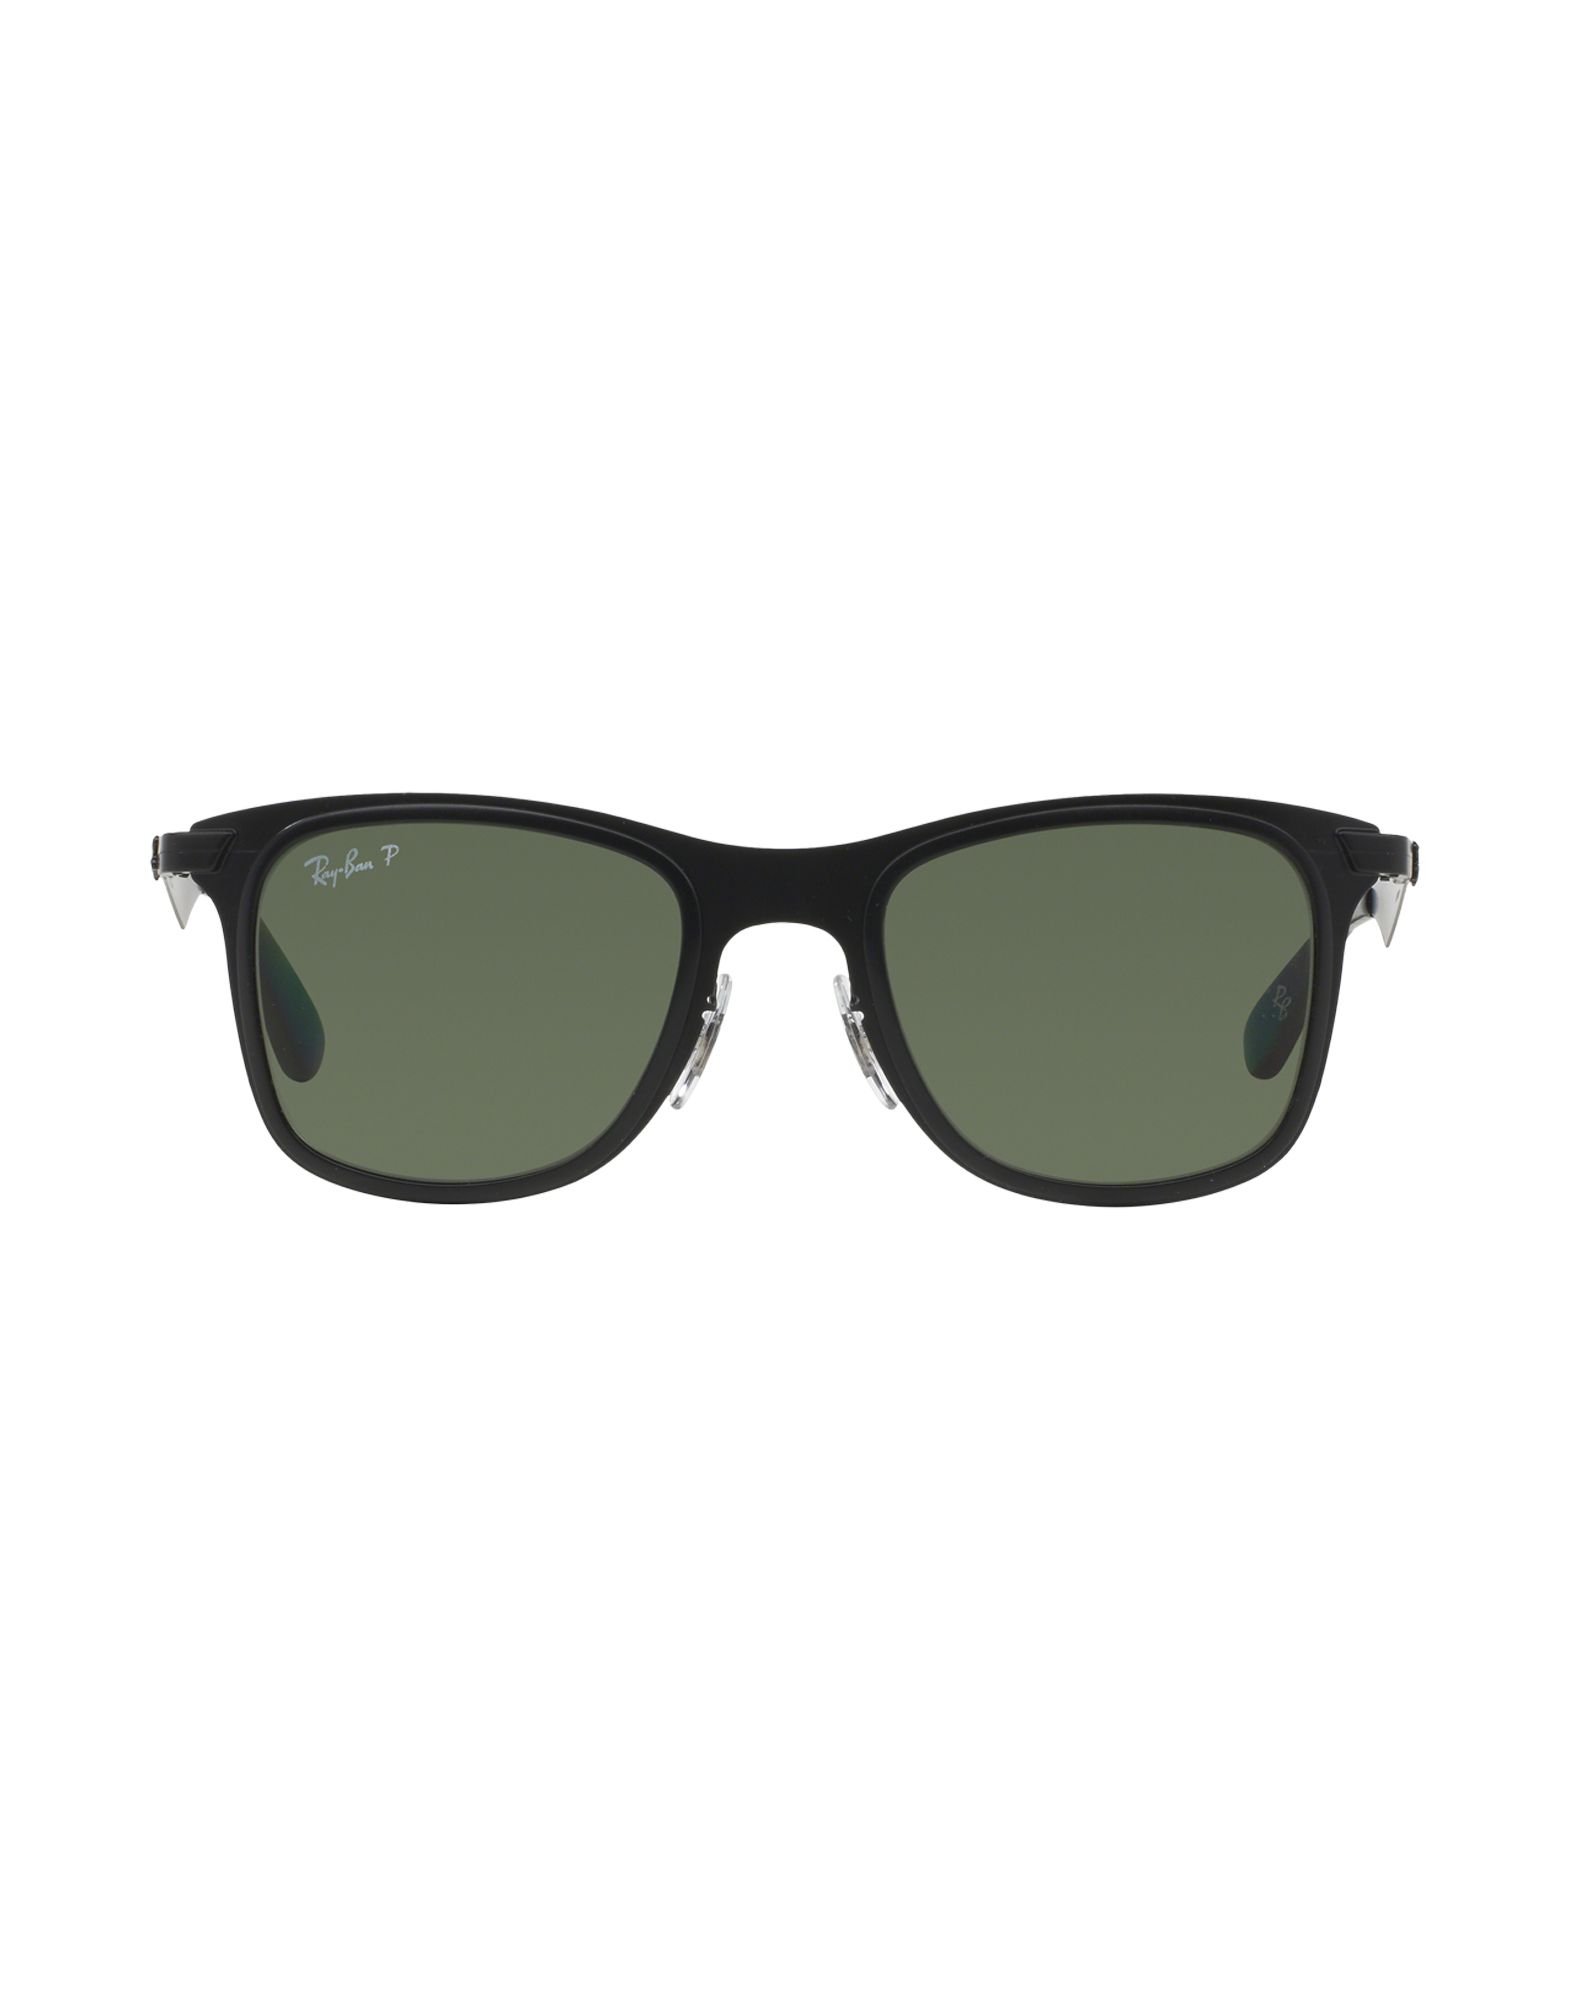 Lyst - Ray-Ban Sunglasses in Black